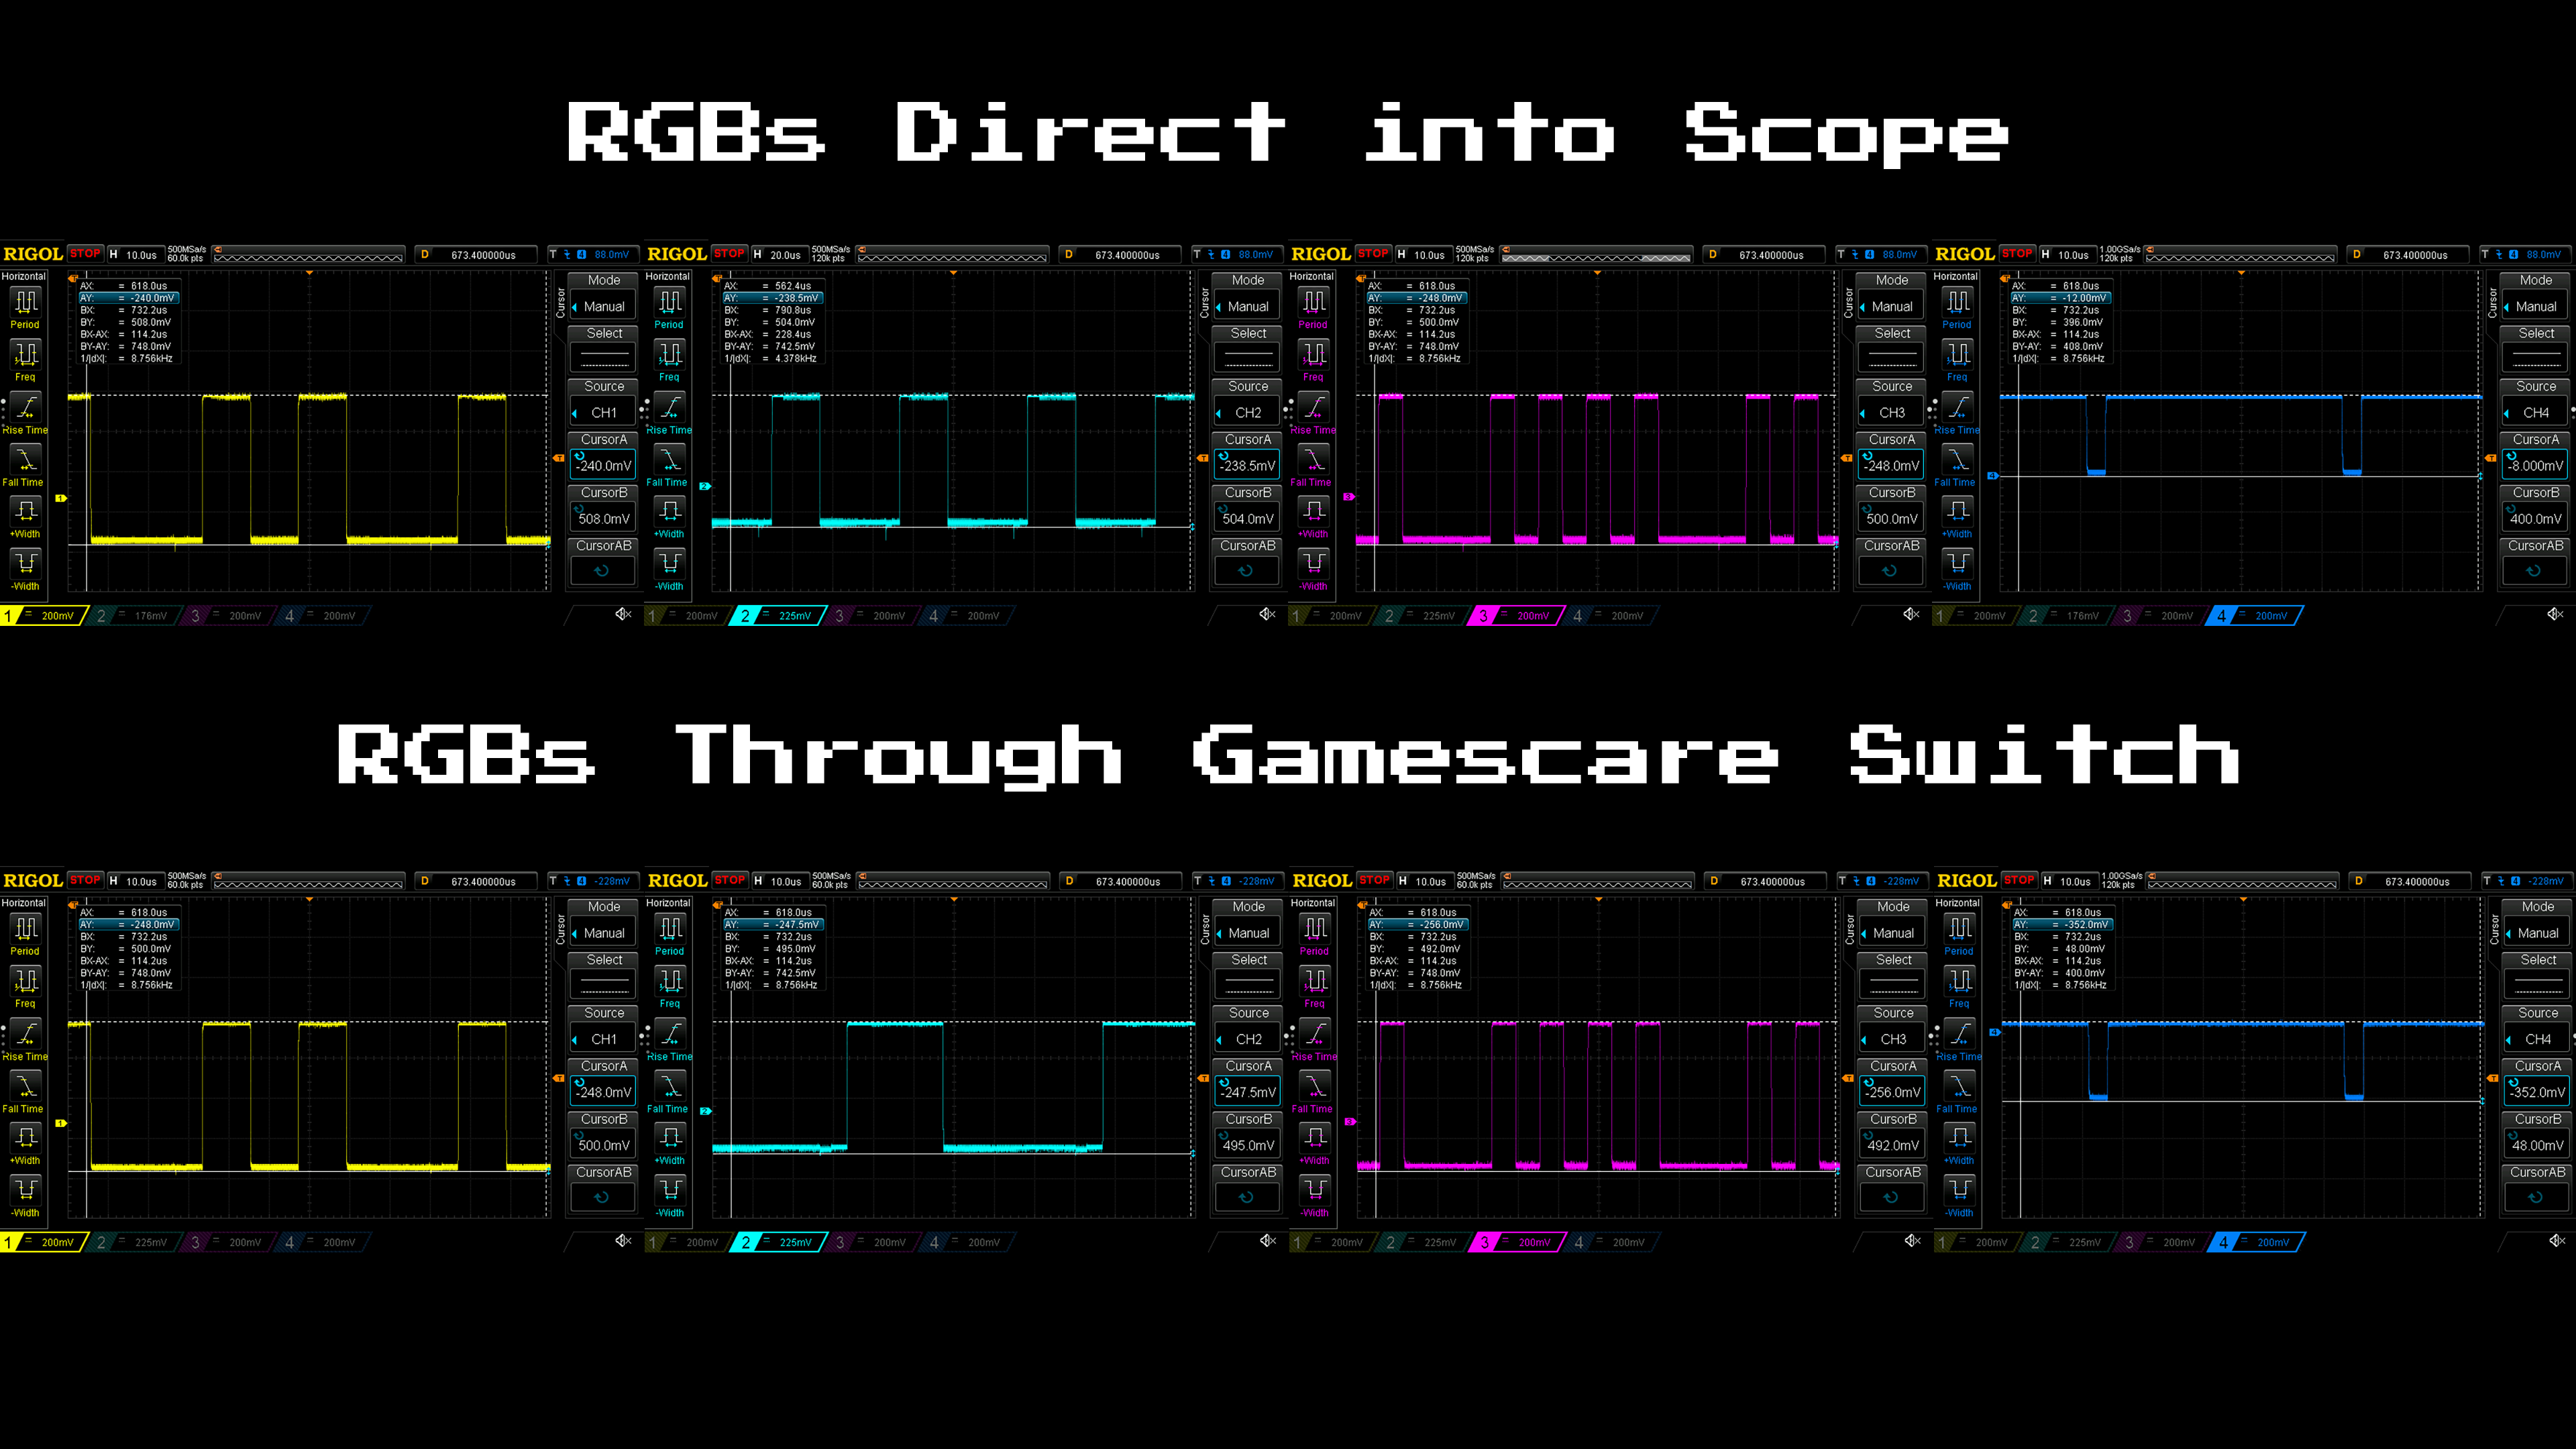 GamesCare 8×2 SCART Switch Review